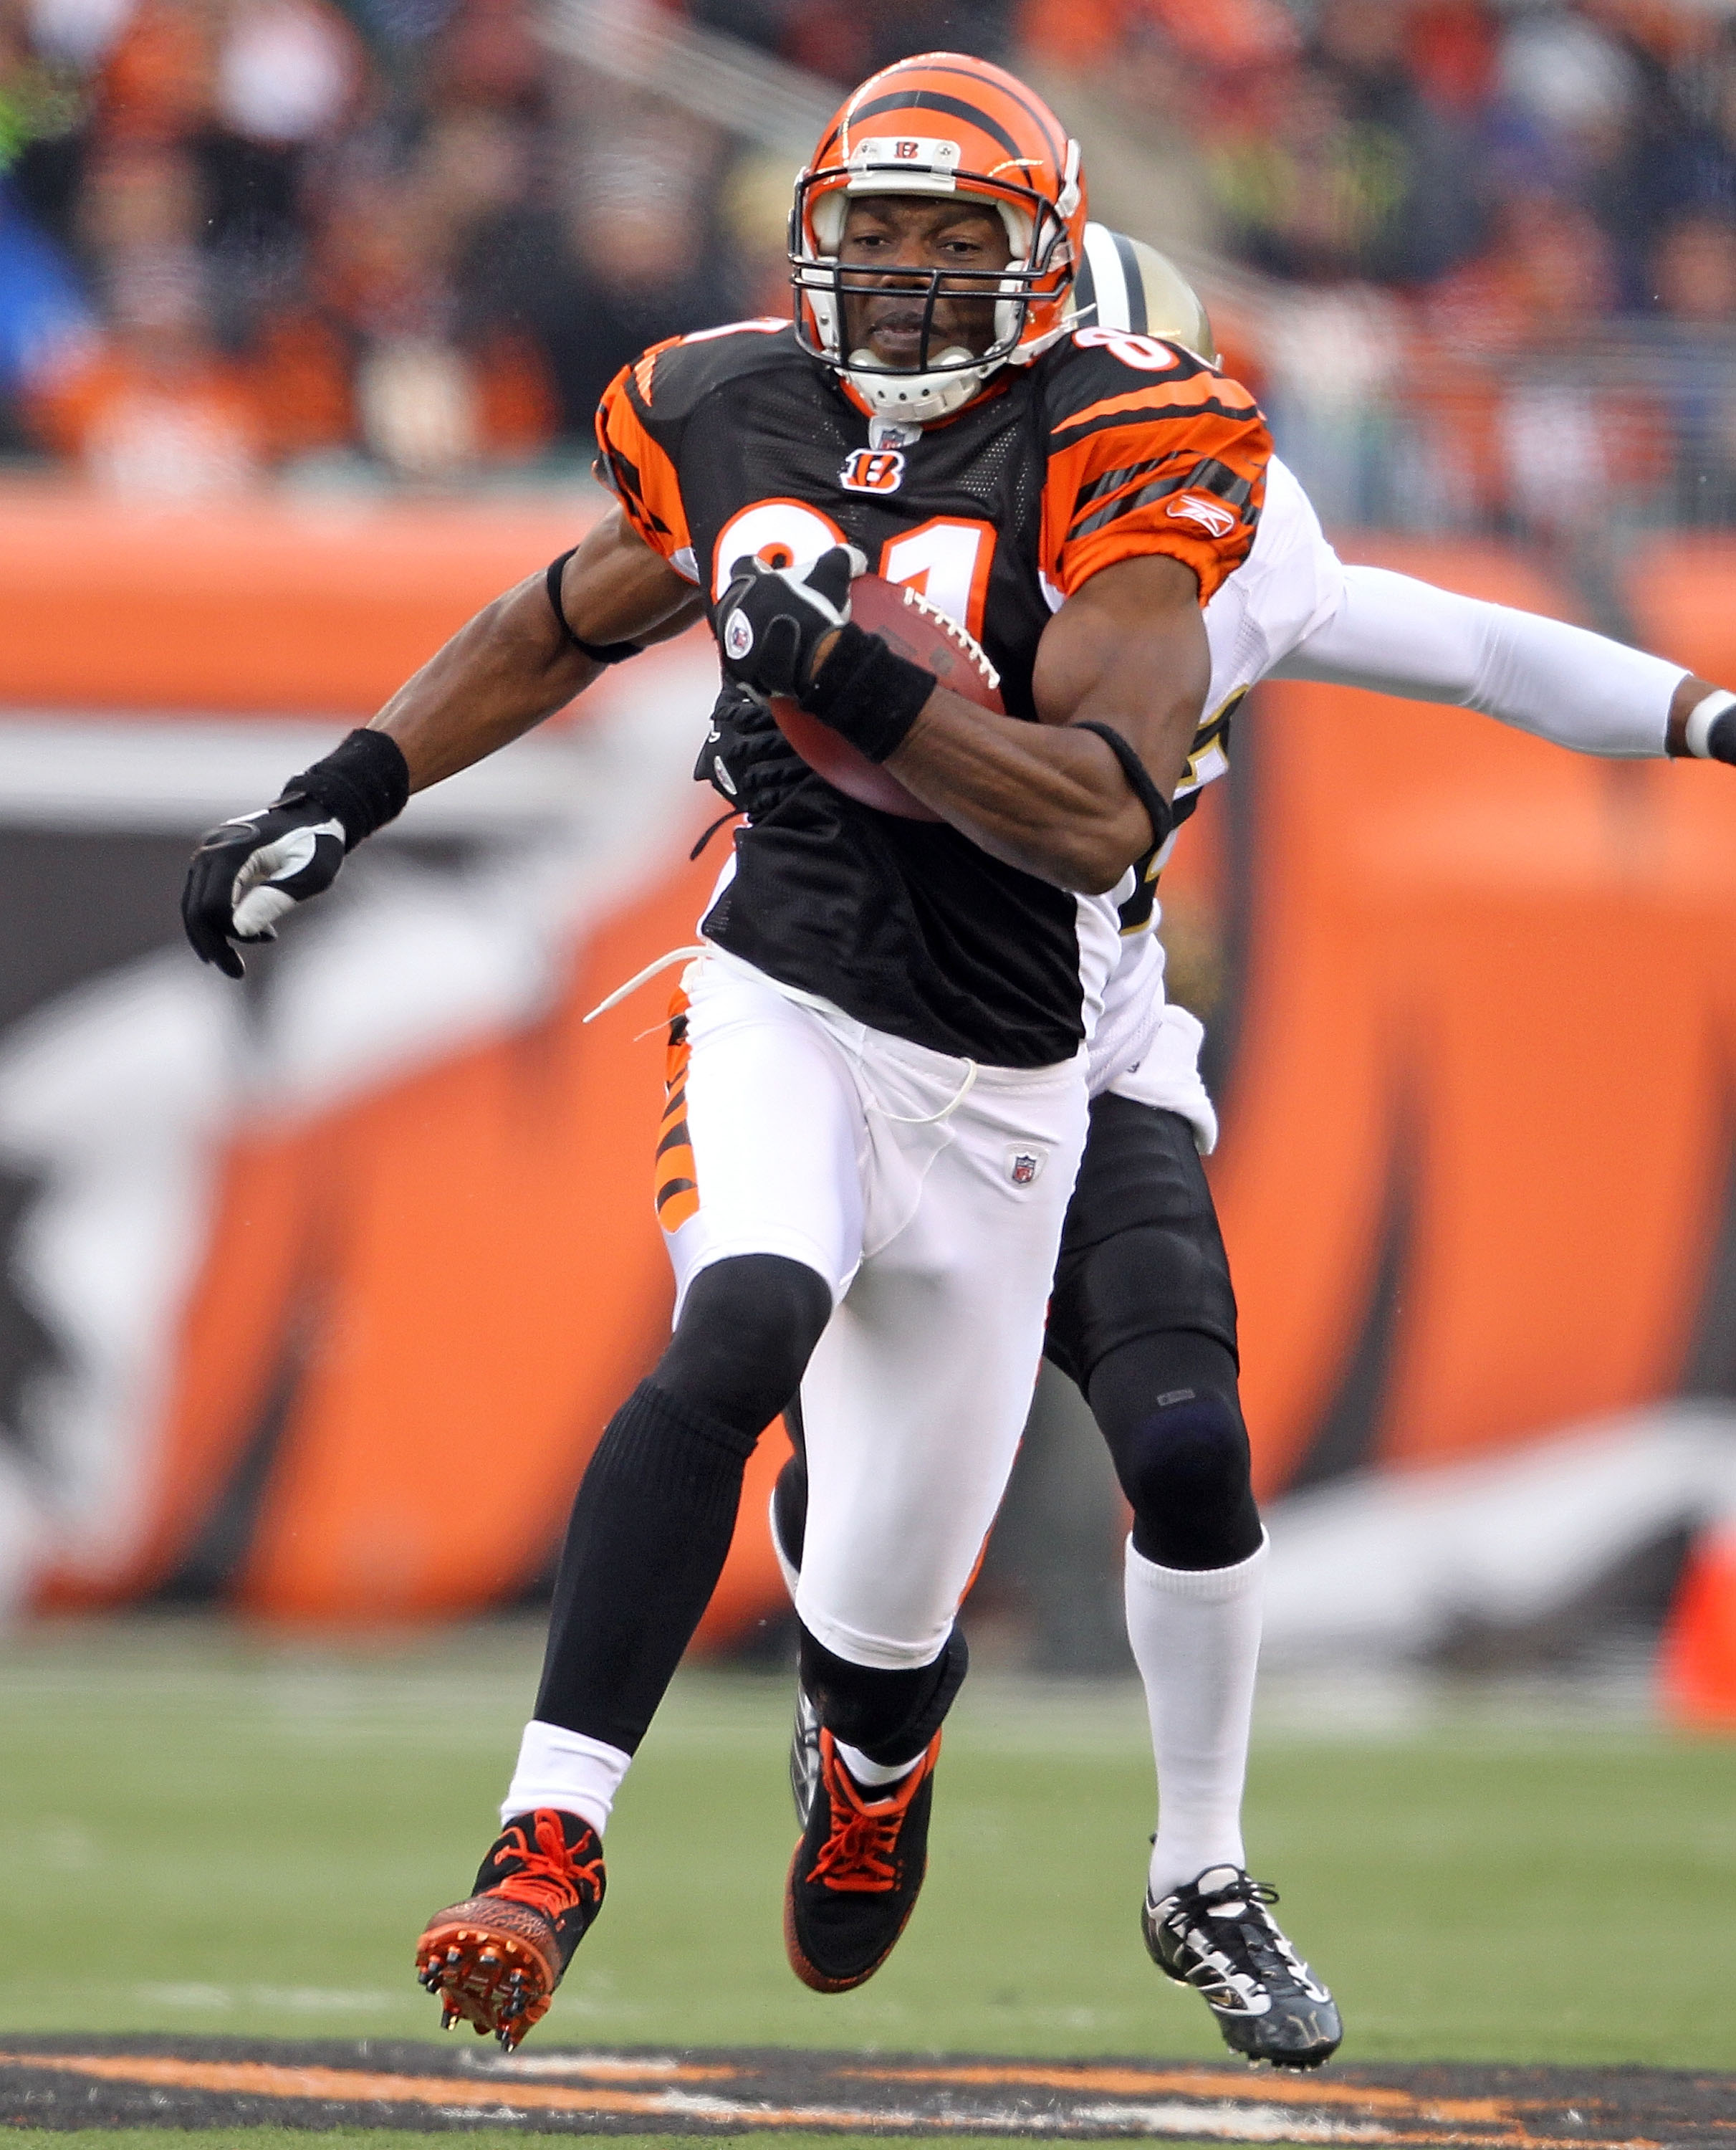 Bengals' Terrell Owens out for season with knee injury